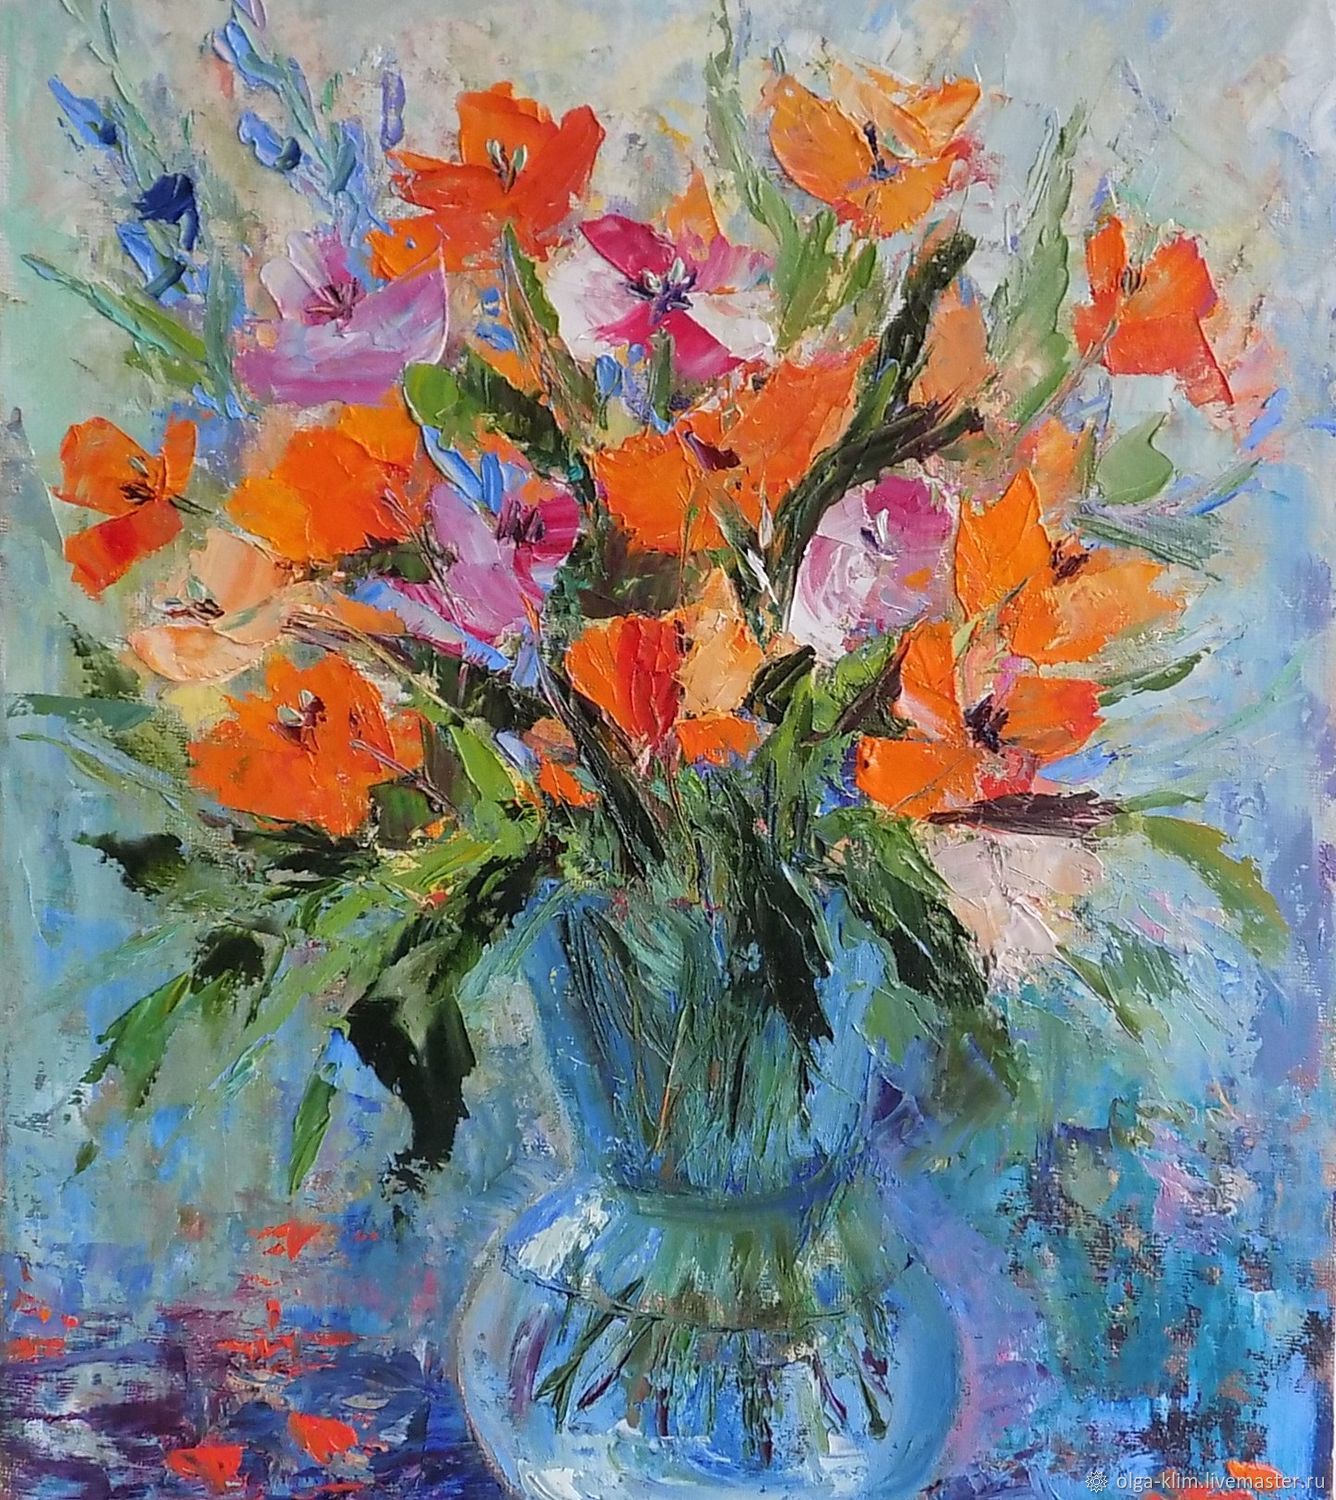 Painting Orange Flowers In A Vase On A Blue Background Abstract Bouquet Oil Kupit Na Yarmarke Masterov Jx8r8com Kartiny Ekaterinburg,Giant Octopus Cooking